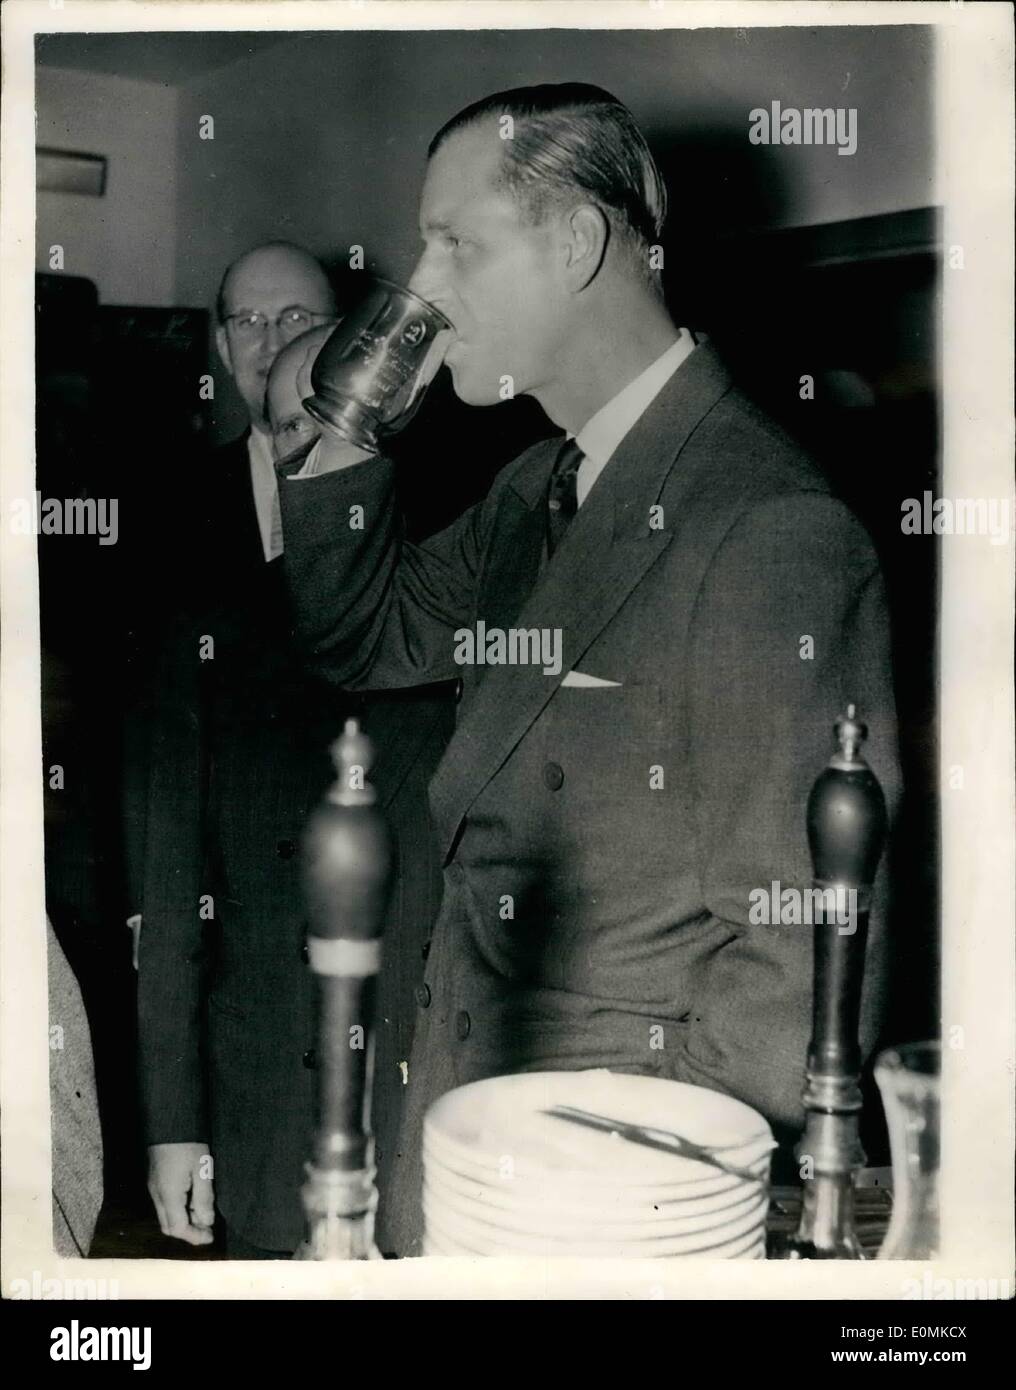 Oct. 10, 1955 - The Duke of Edinburgh visits the British trade fair in Copenhagen: The Duke of Edinburgh, who is in Denmark on a five-day visit, paid a visit to the British Trade Fair in Copenhagen. He spent two hours touring the exhibition and visited the British Inn Britania, where he had a beer in a silber tankard, which was afterwards given him as a souvenir. Photo shows the Duke of Edinburgh takes a drink of beer from the silver tankards in the British inn Britania. Stock Photo